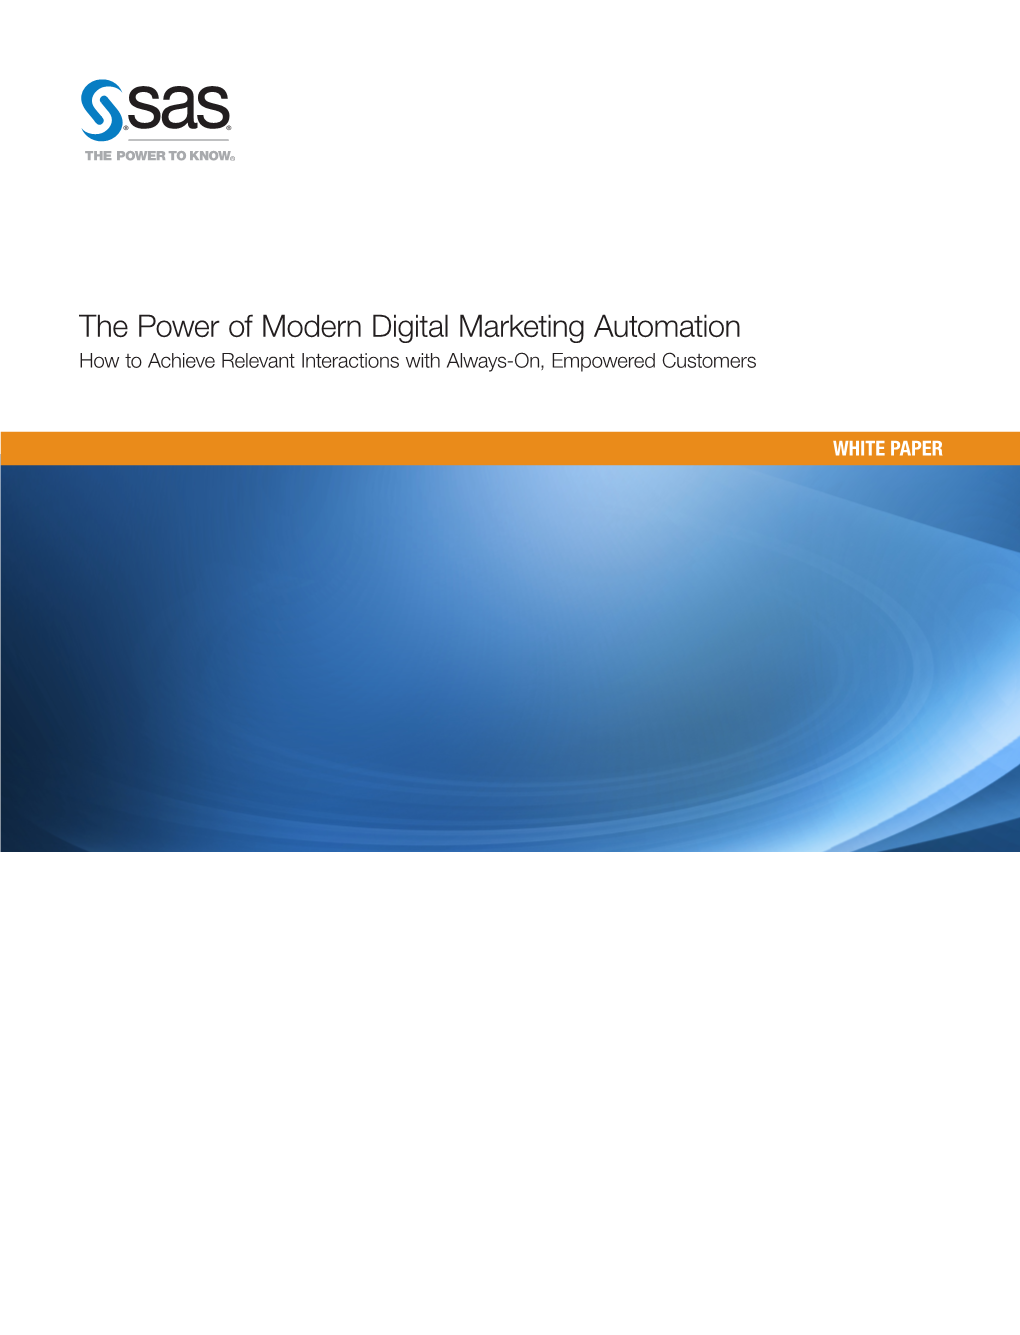 The Power of Modern Digital Marketing Automation How to Achieve Relevant Interactions with Always-On, Empowered Customers